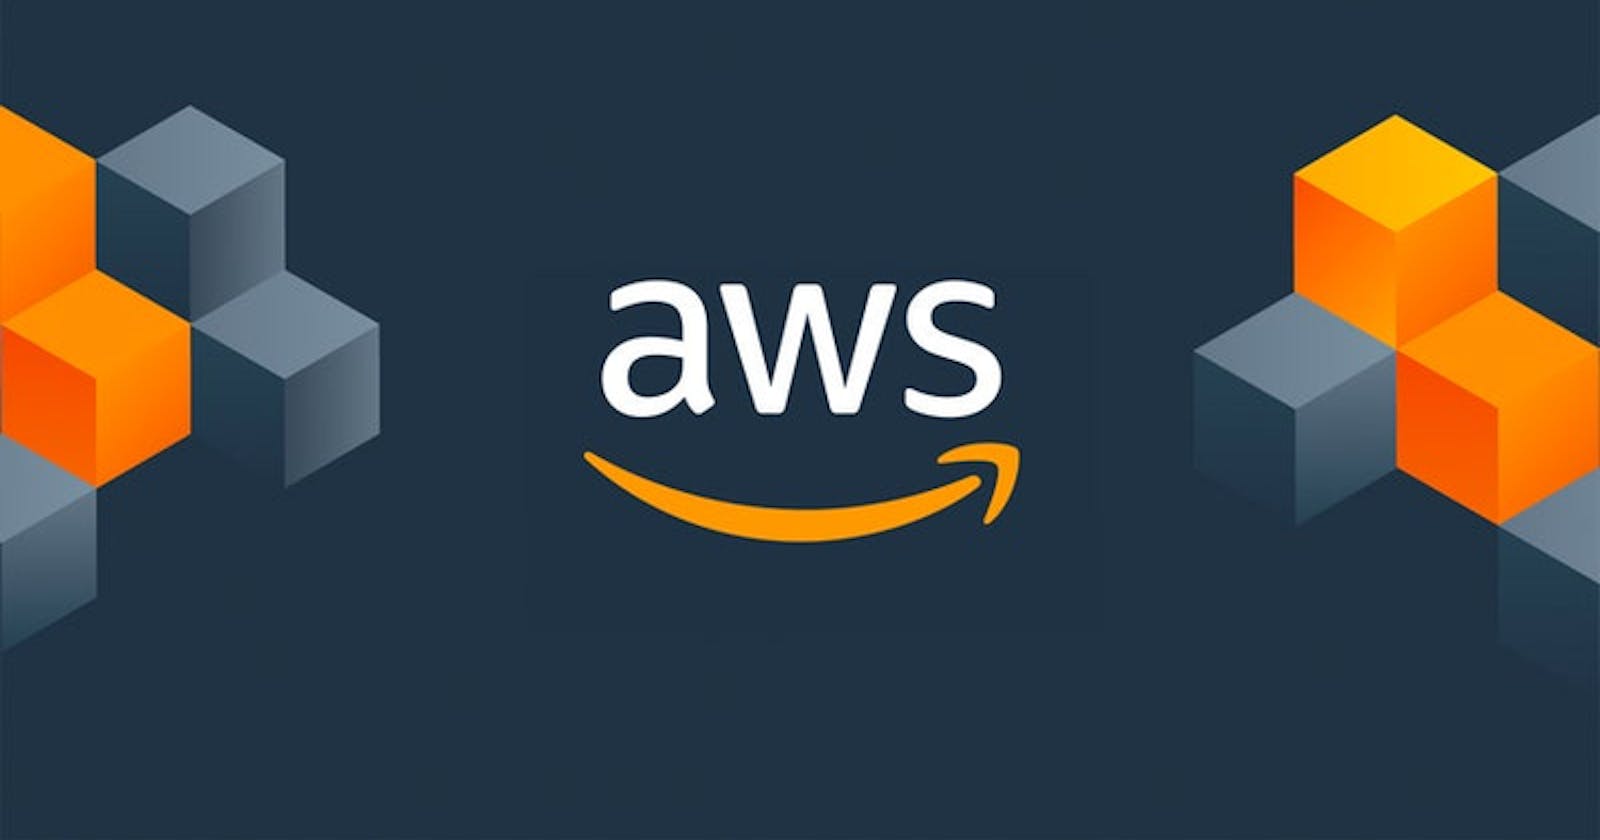 How to create an Account in AWS (Amazon Web Services)